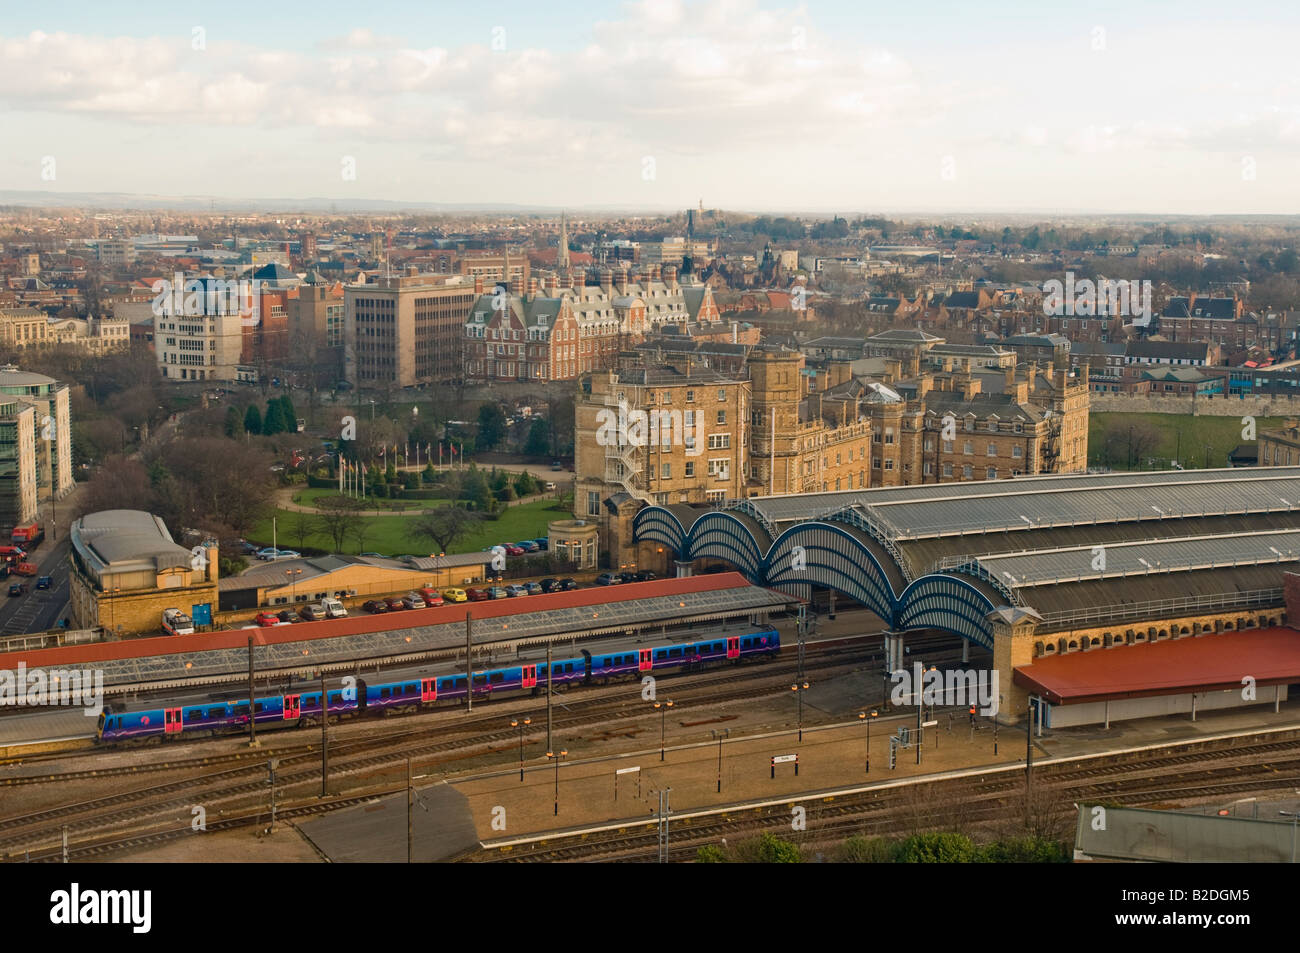 Elevated view of the York city with the platforms of York station with their curved roofs in the foreground. York. UK Stock Photo